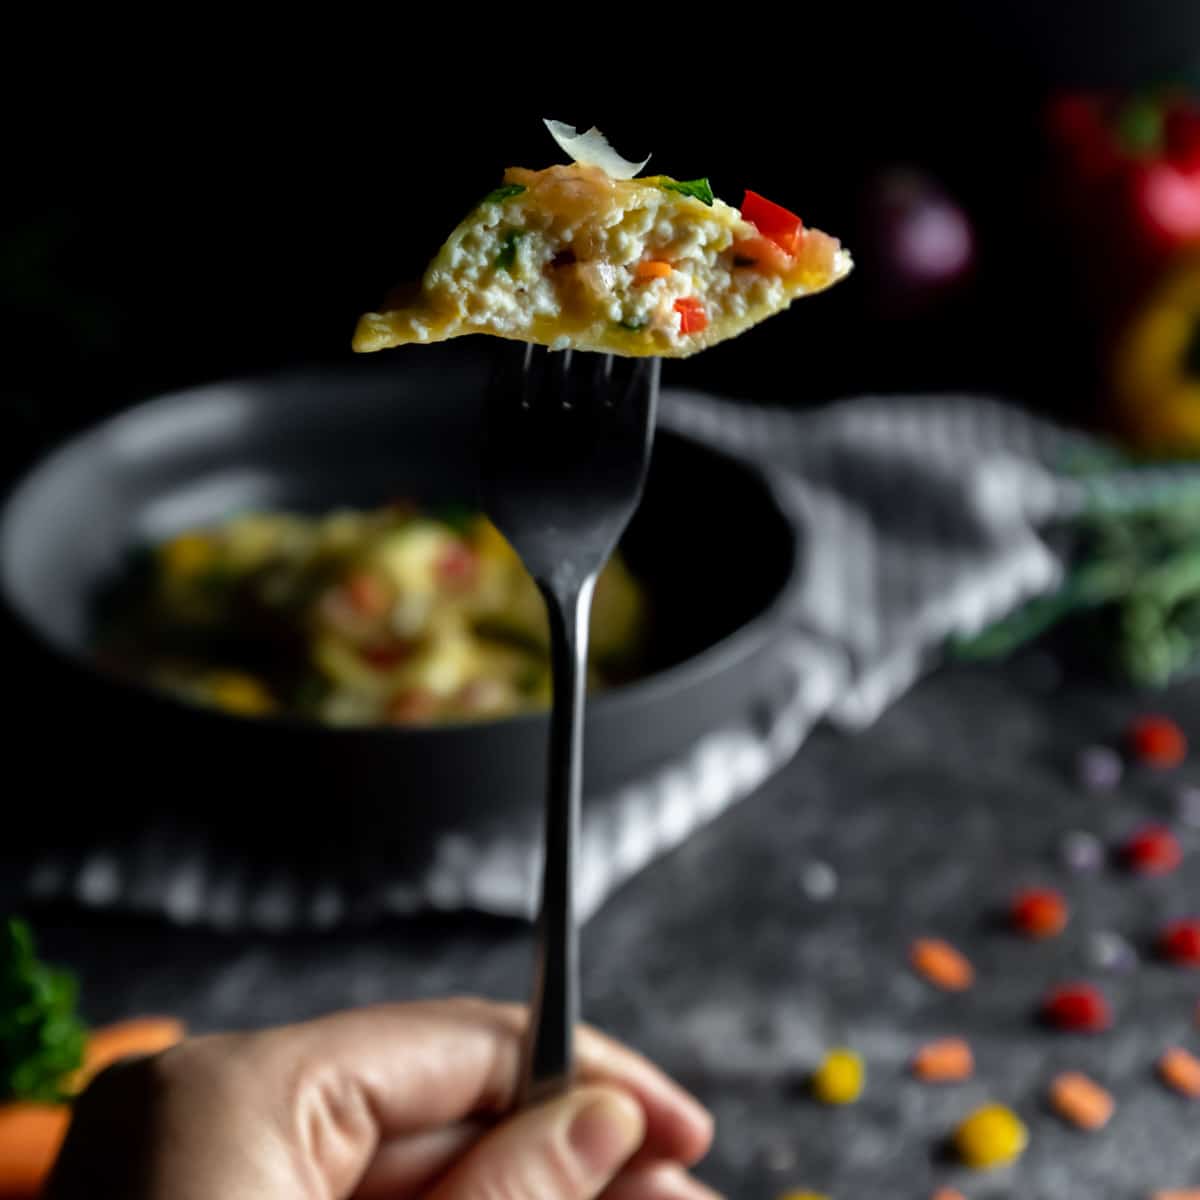 Half of a ravioli filled with ricotta and Primavera vegetables on a fork